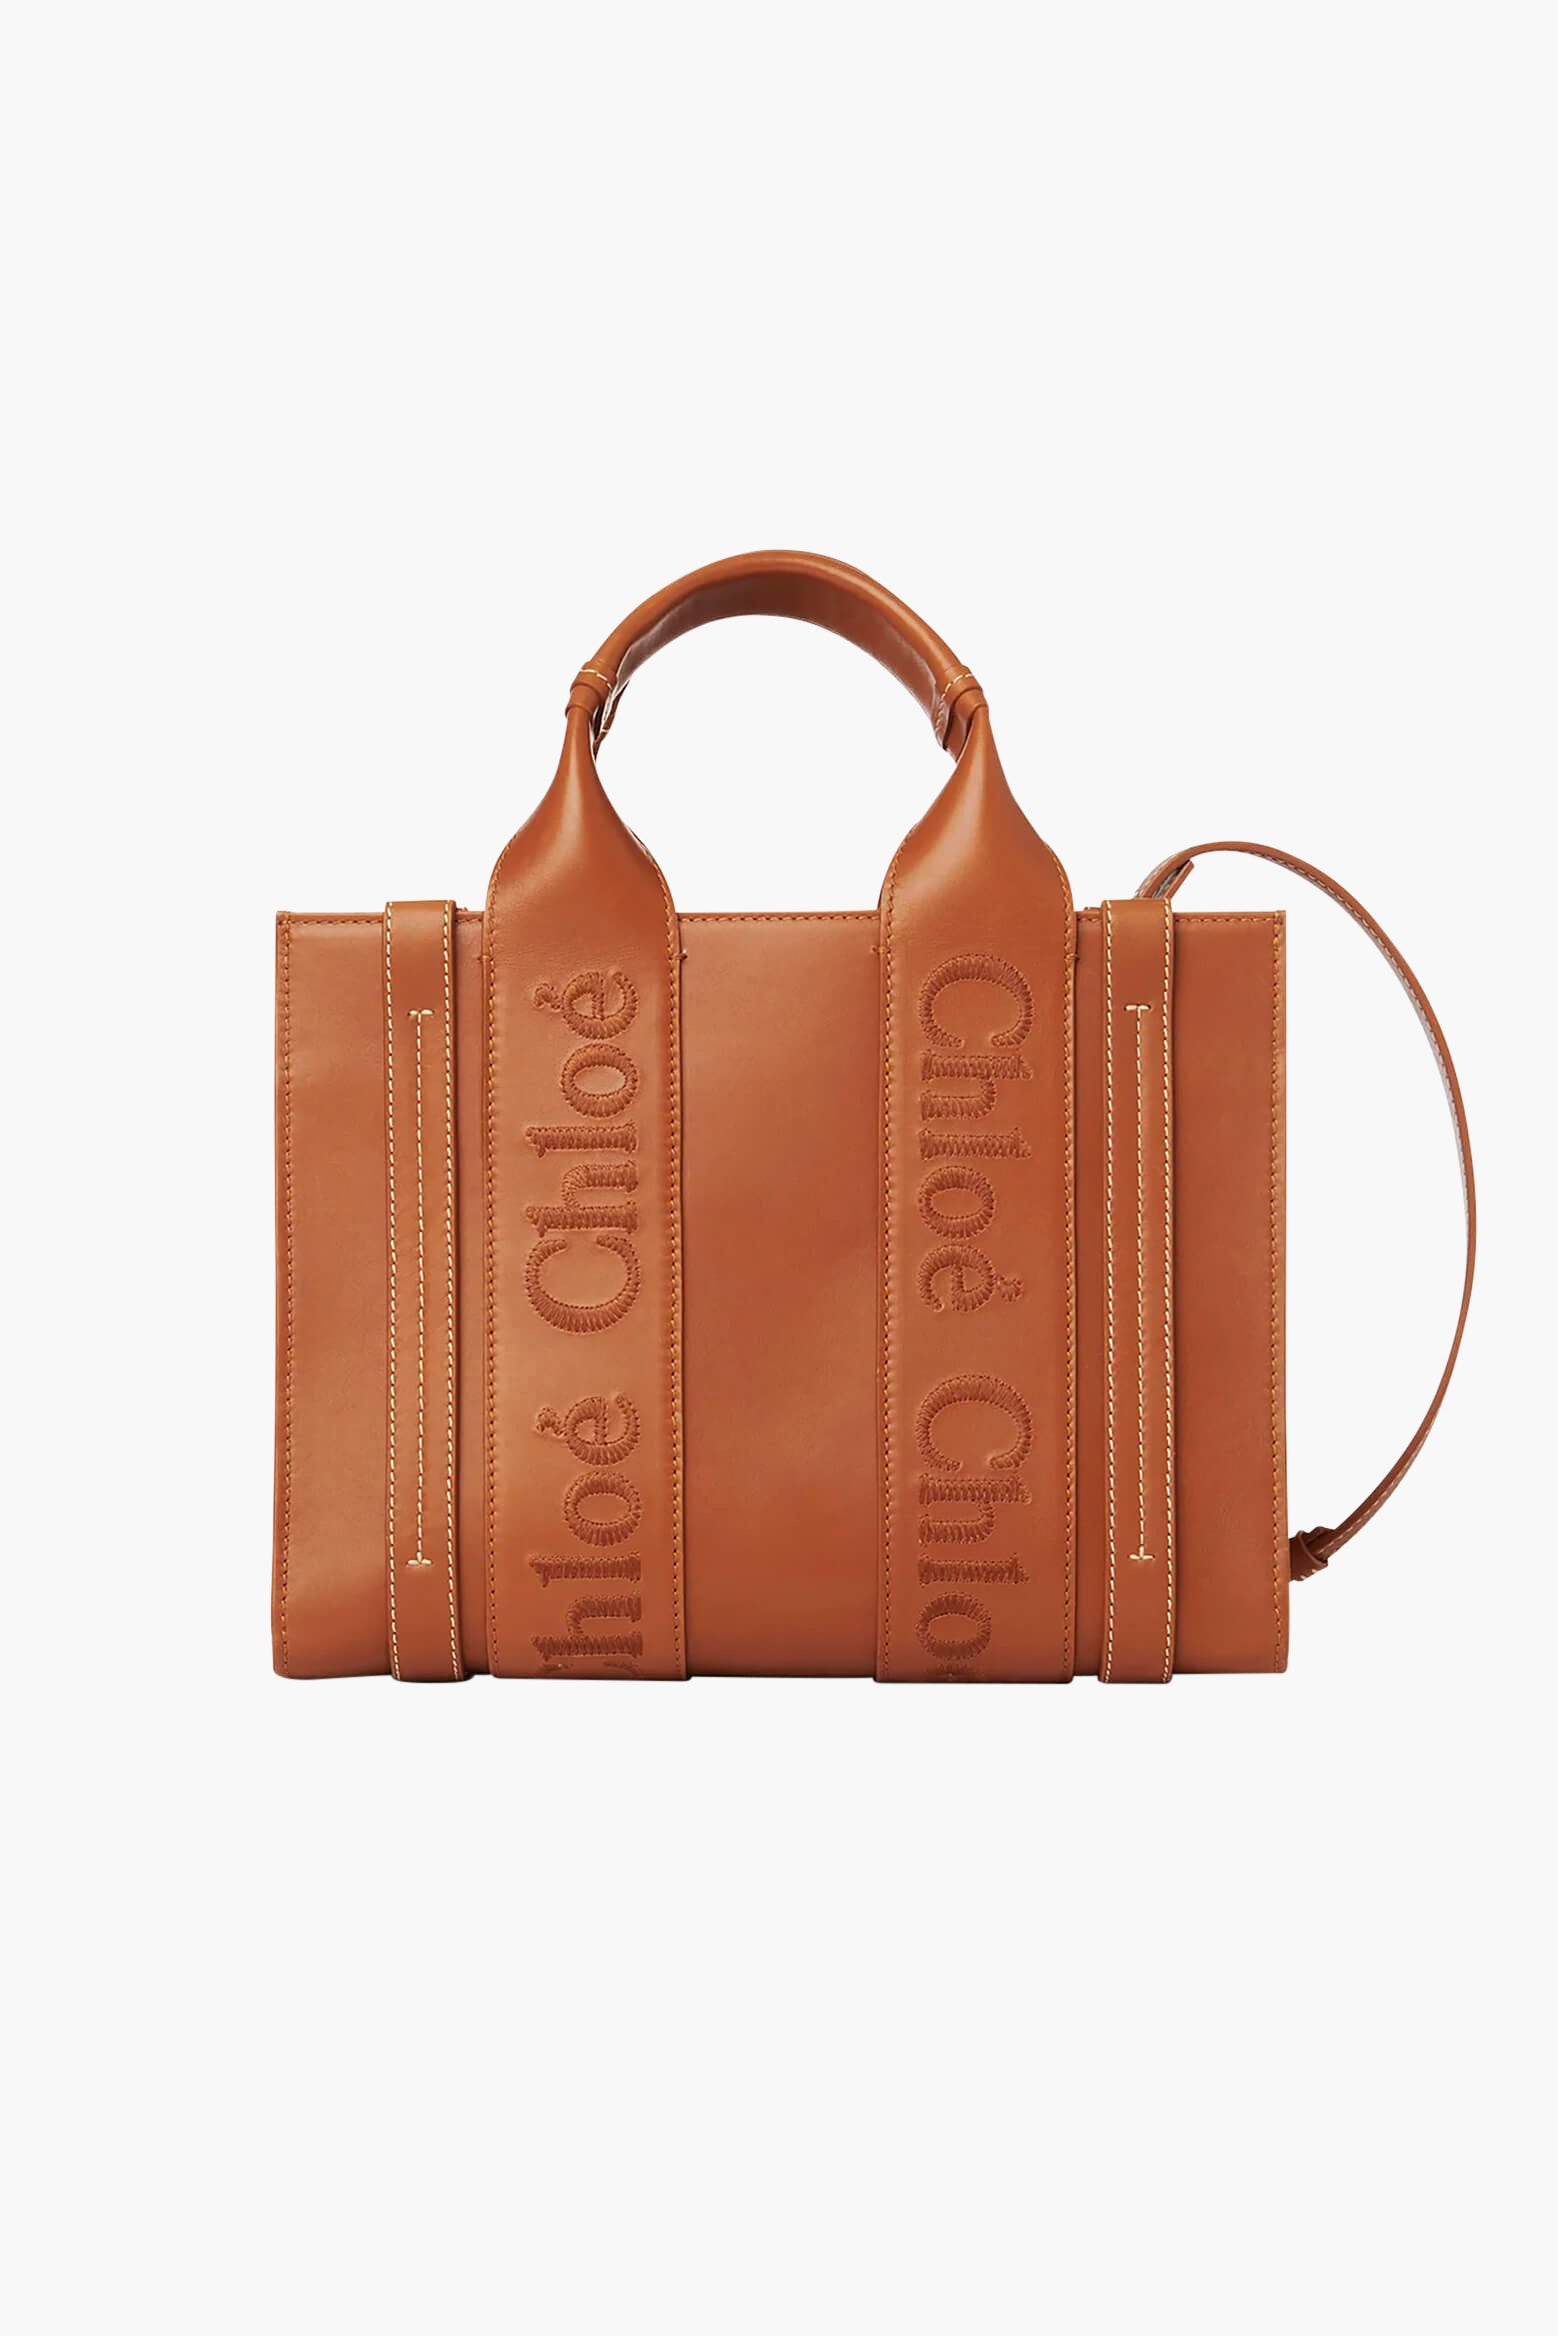 Chloe Small Woody Tote with Strap in Caramel from The New Trend